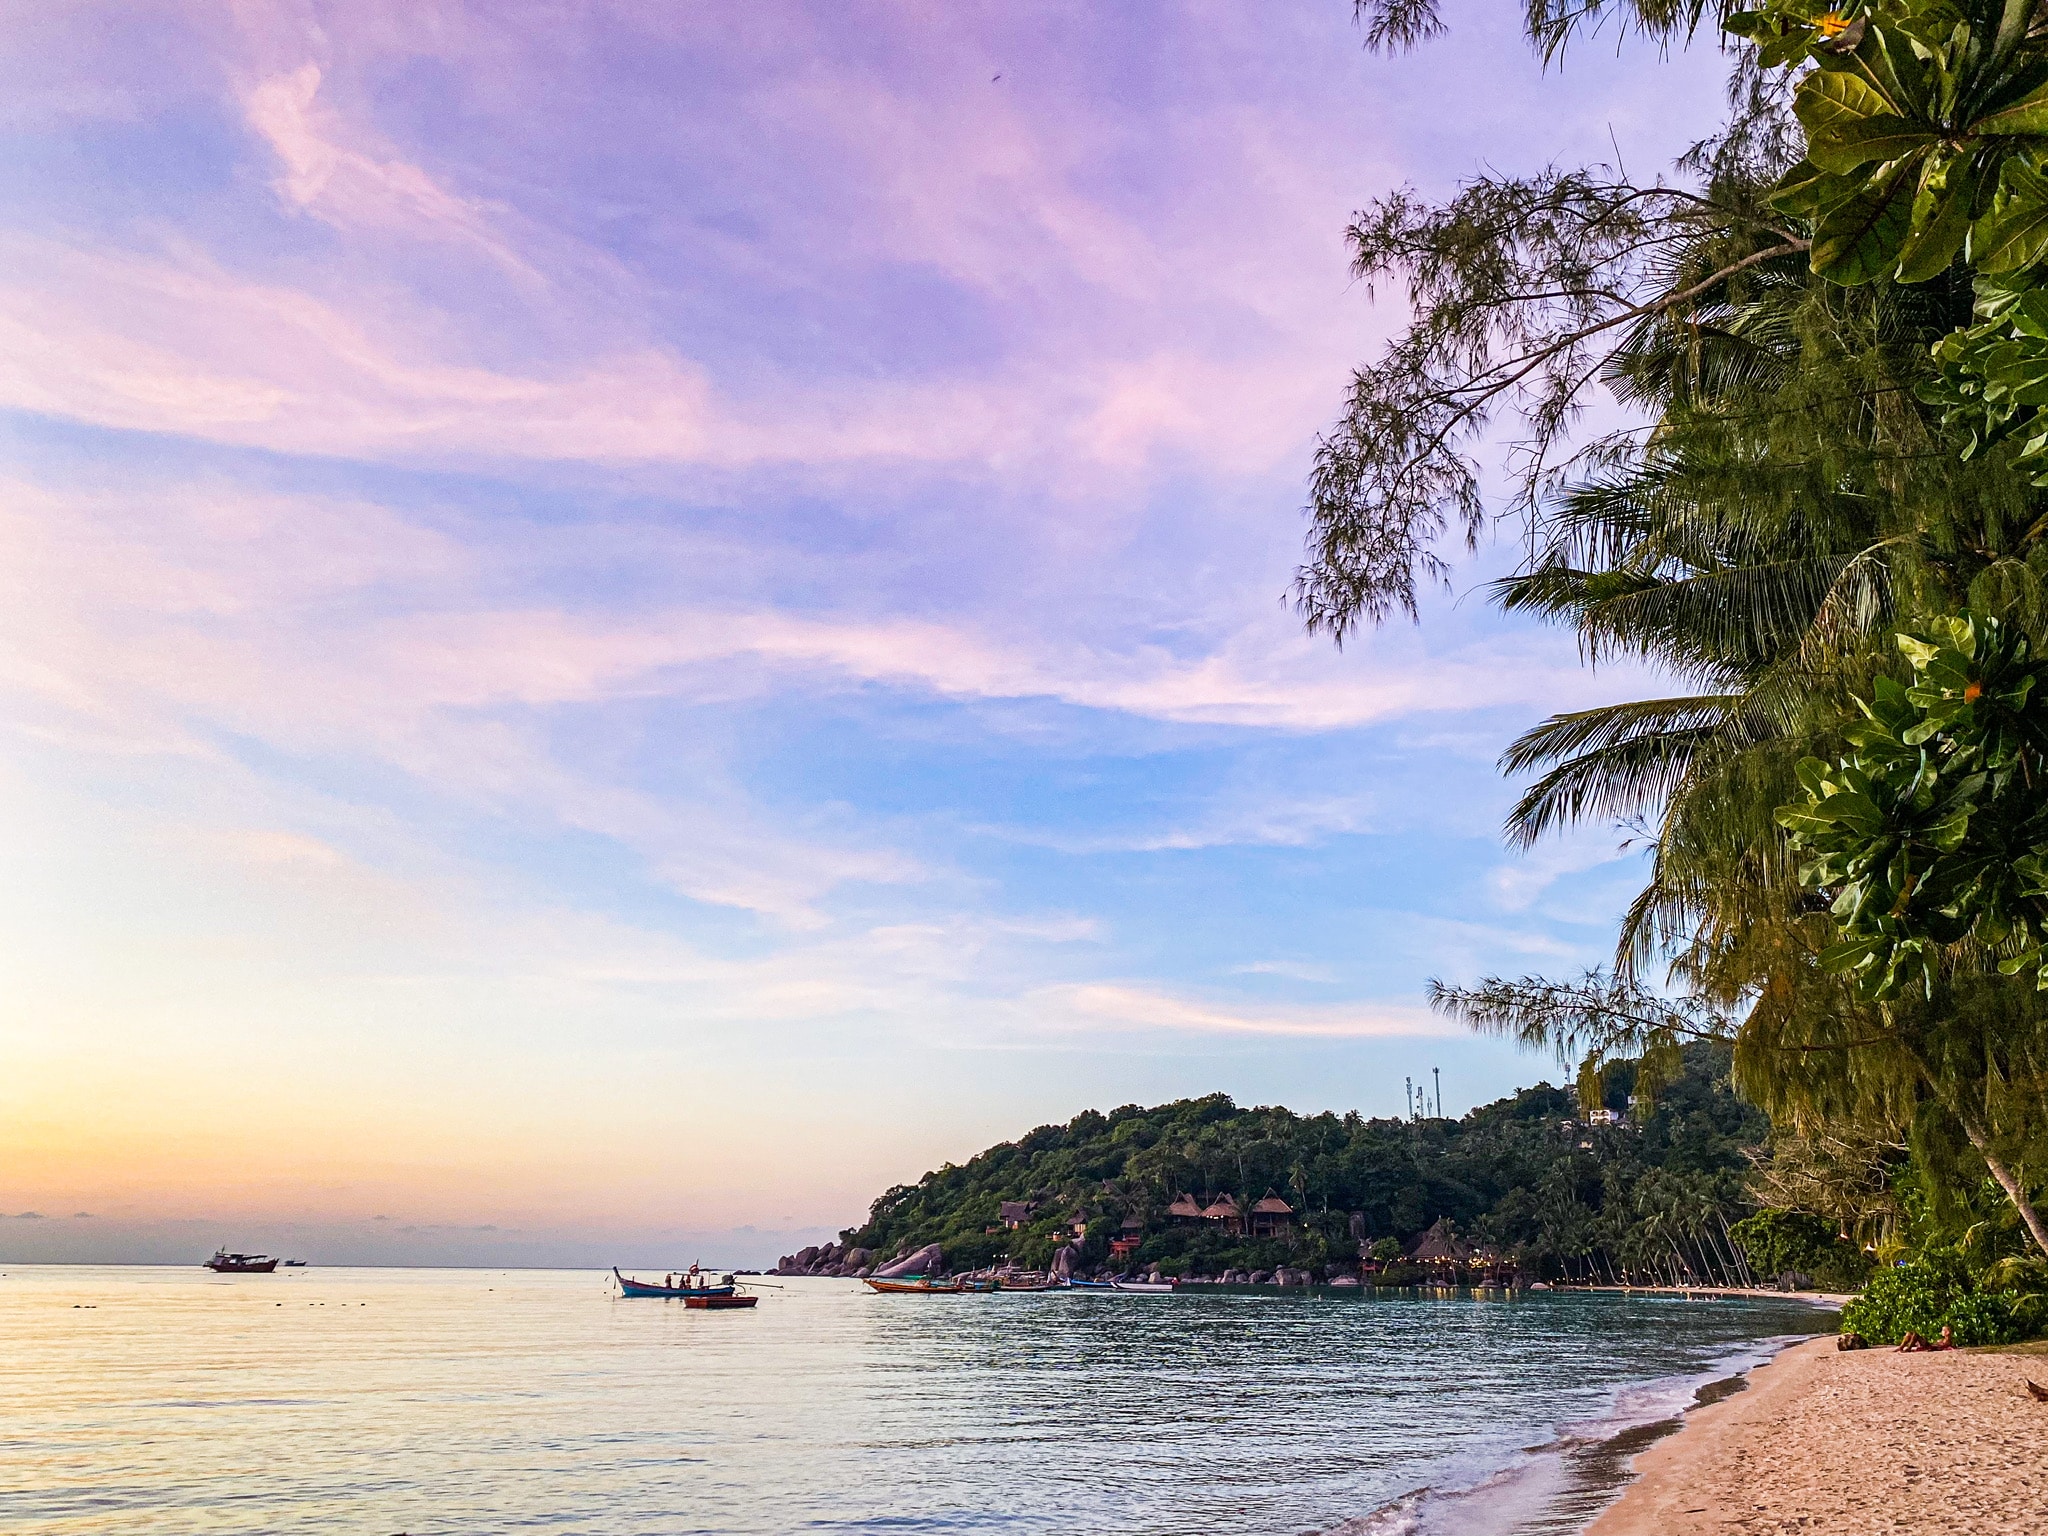 Golden Hour | Ting at lave i Koh Tao